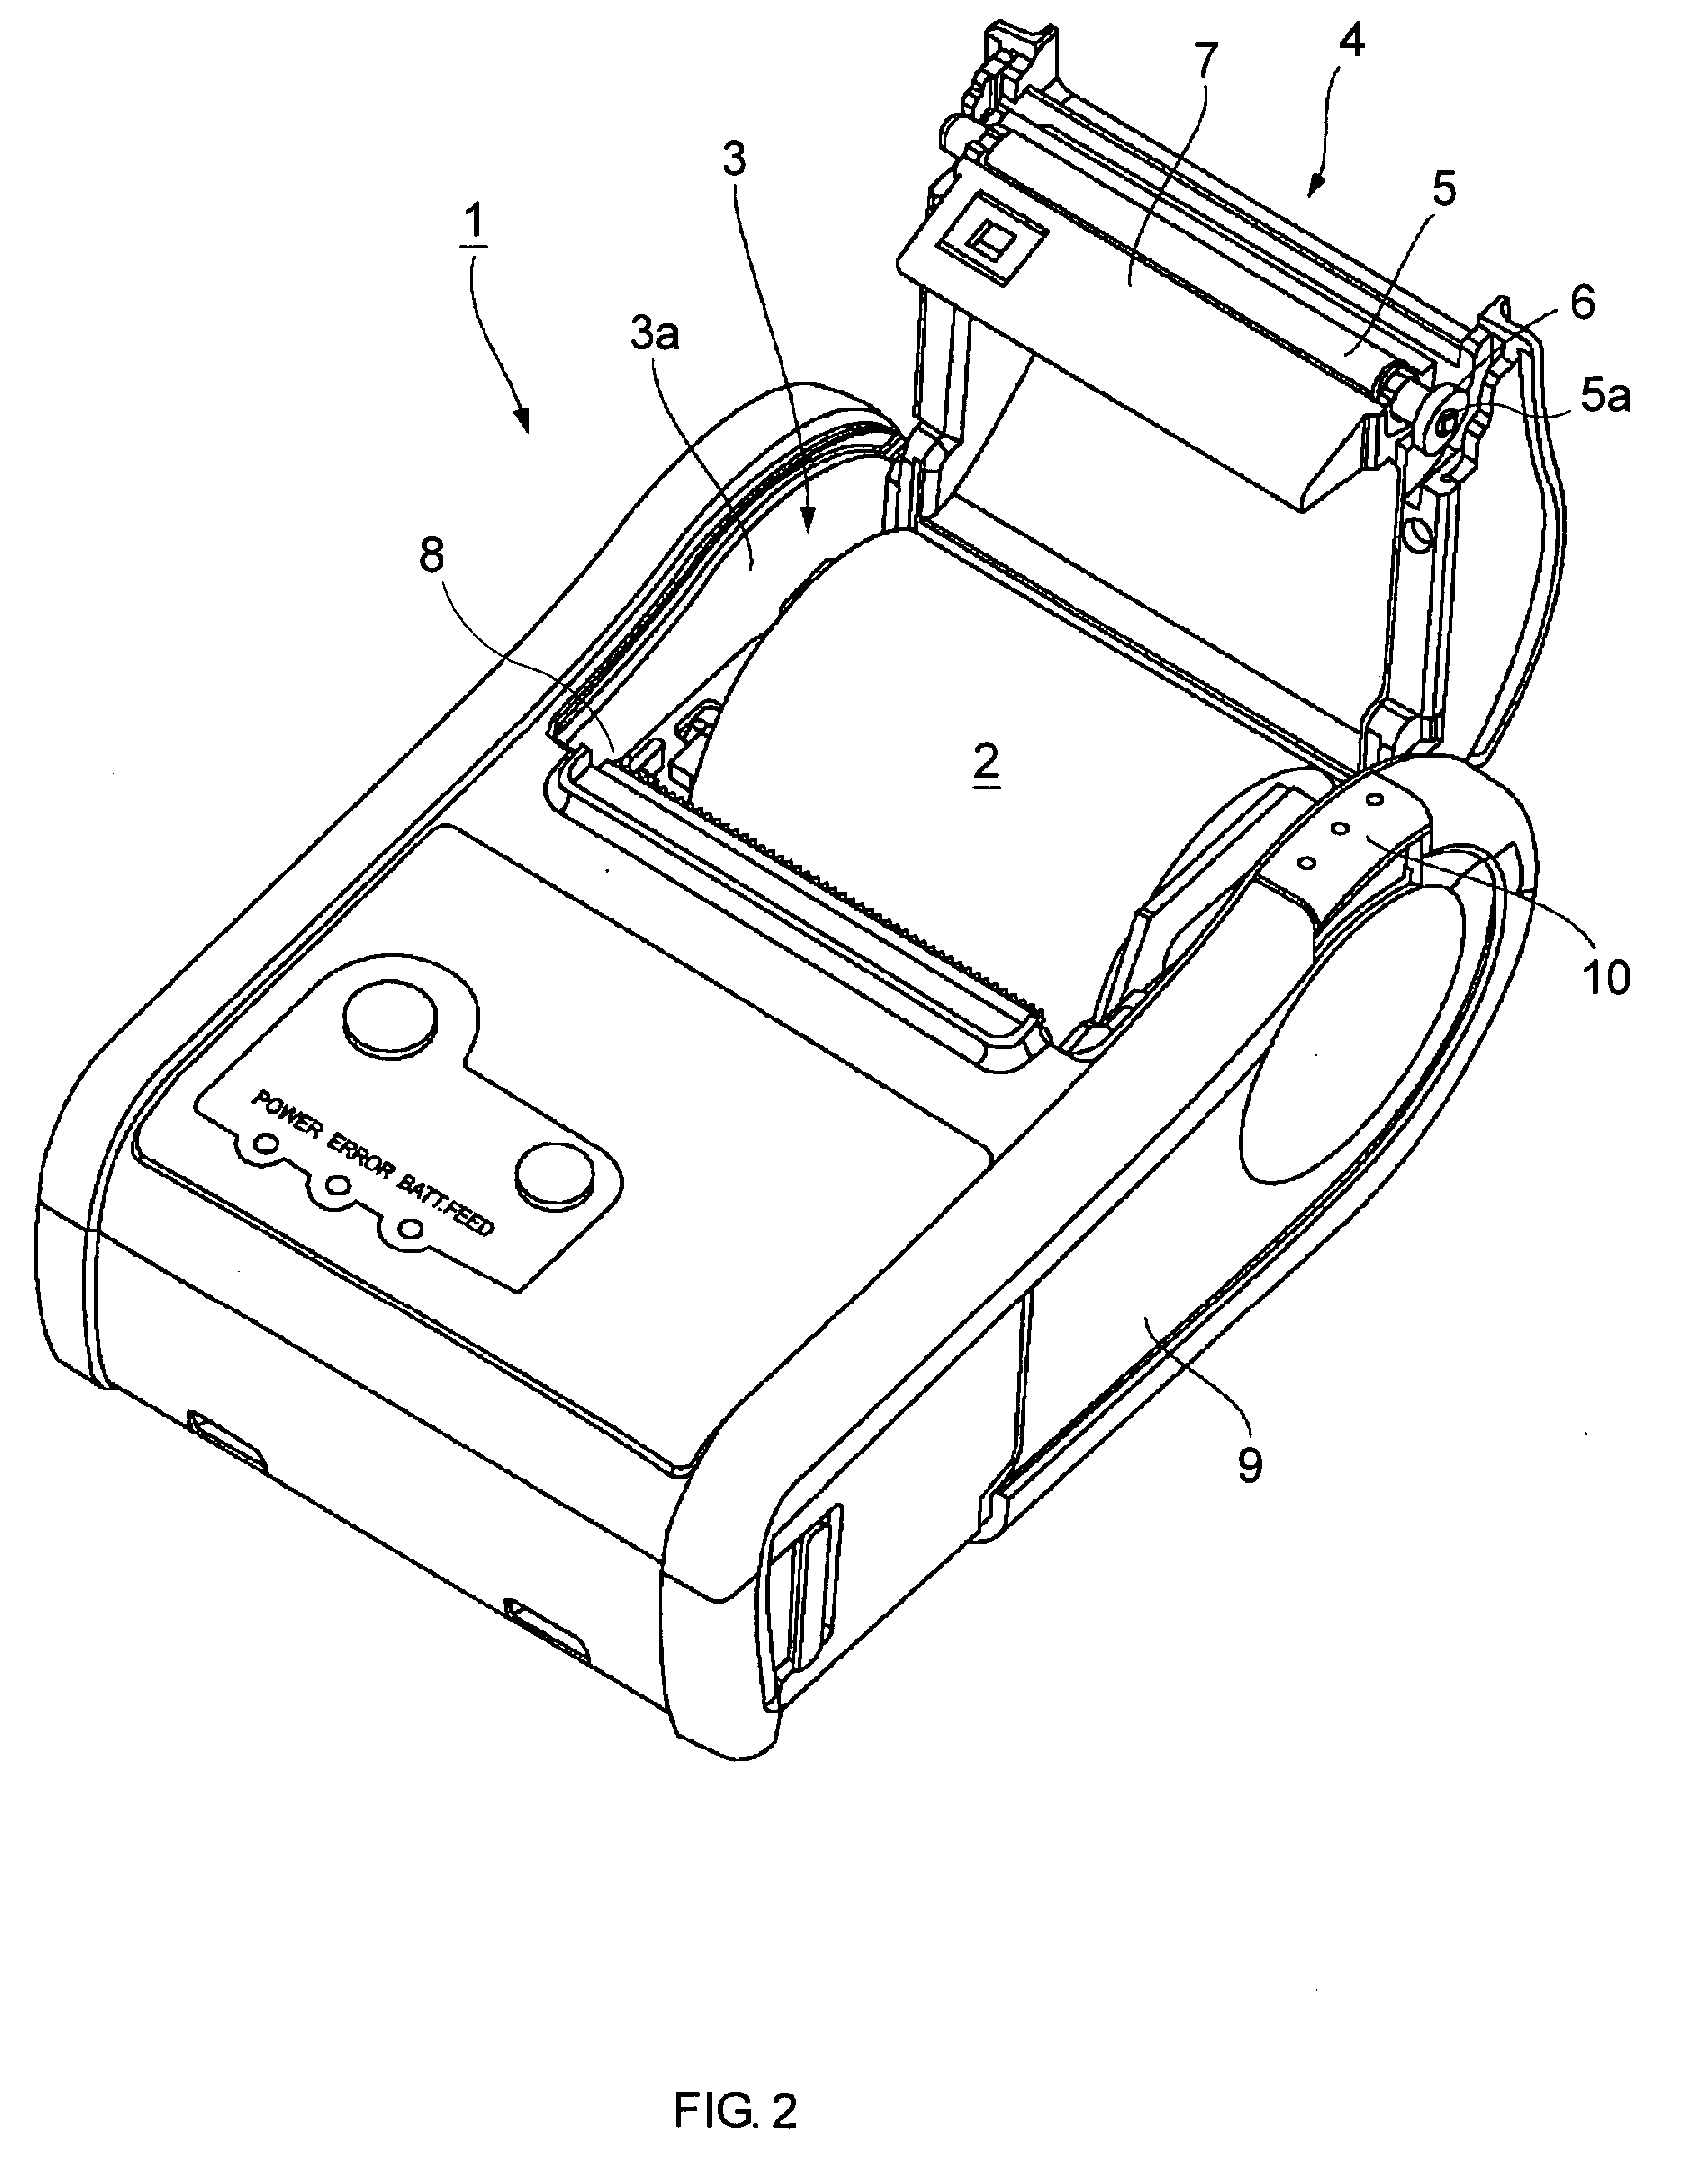 Cover locking/unlocking mechanism and a printer having the cover locking/unlocking mechanism